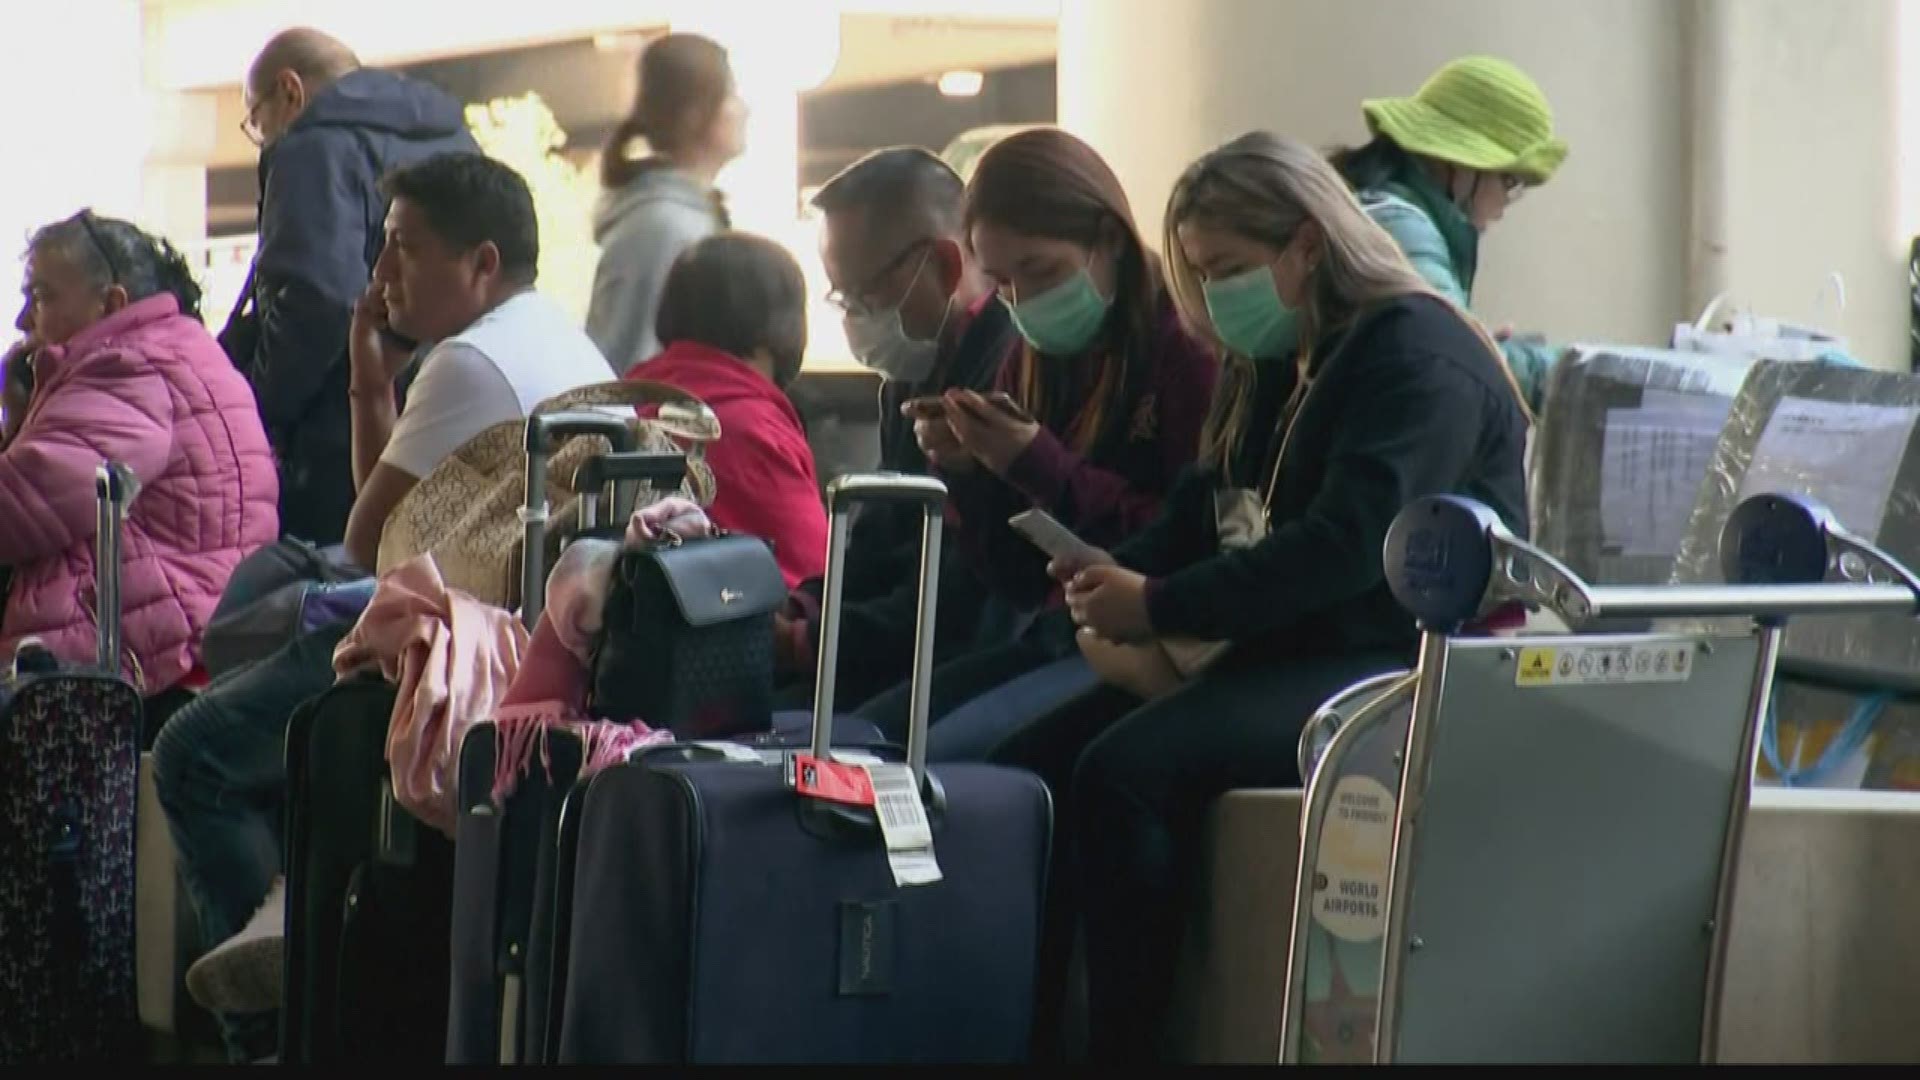 With the number of coronavirus cases growing here in the U.S. and overseas, a lot of people are rethinking their summer travel plans.